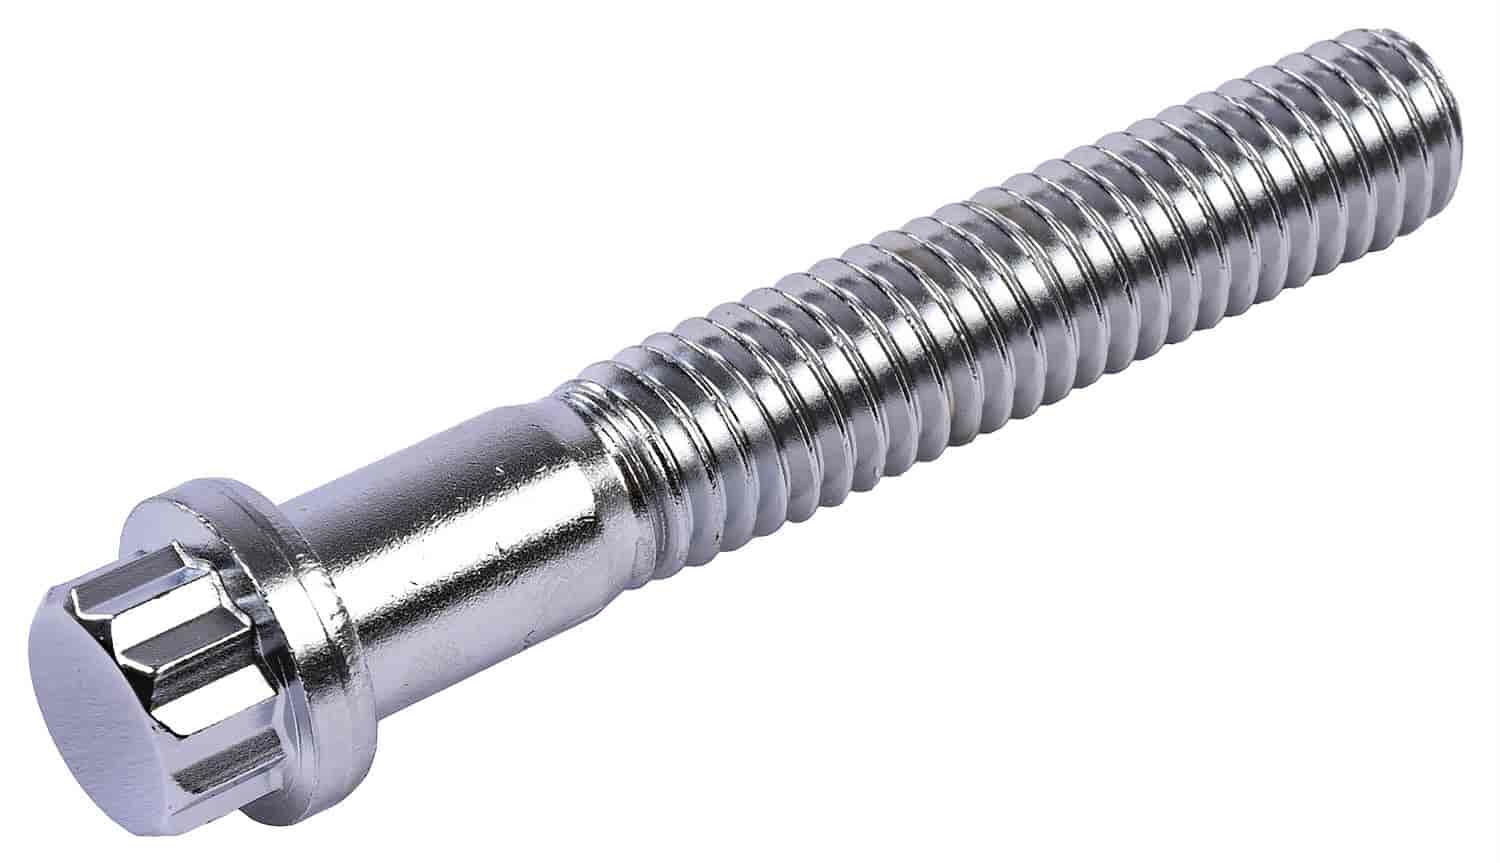 12-Point Fastener [5/16 in. -18 Thread x 2 in. Length]